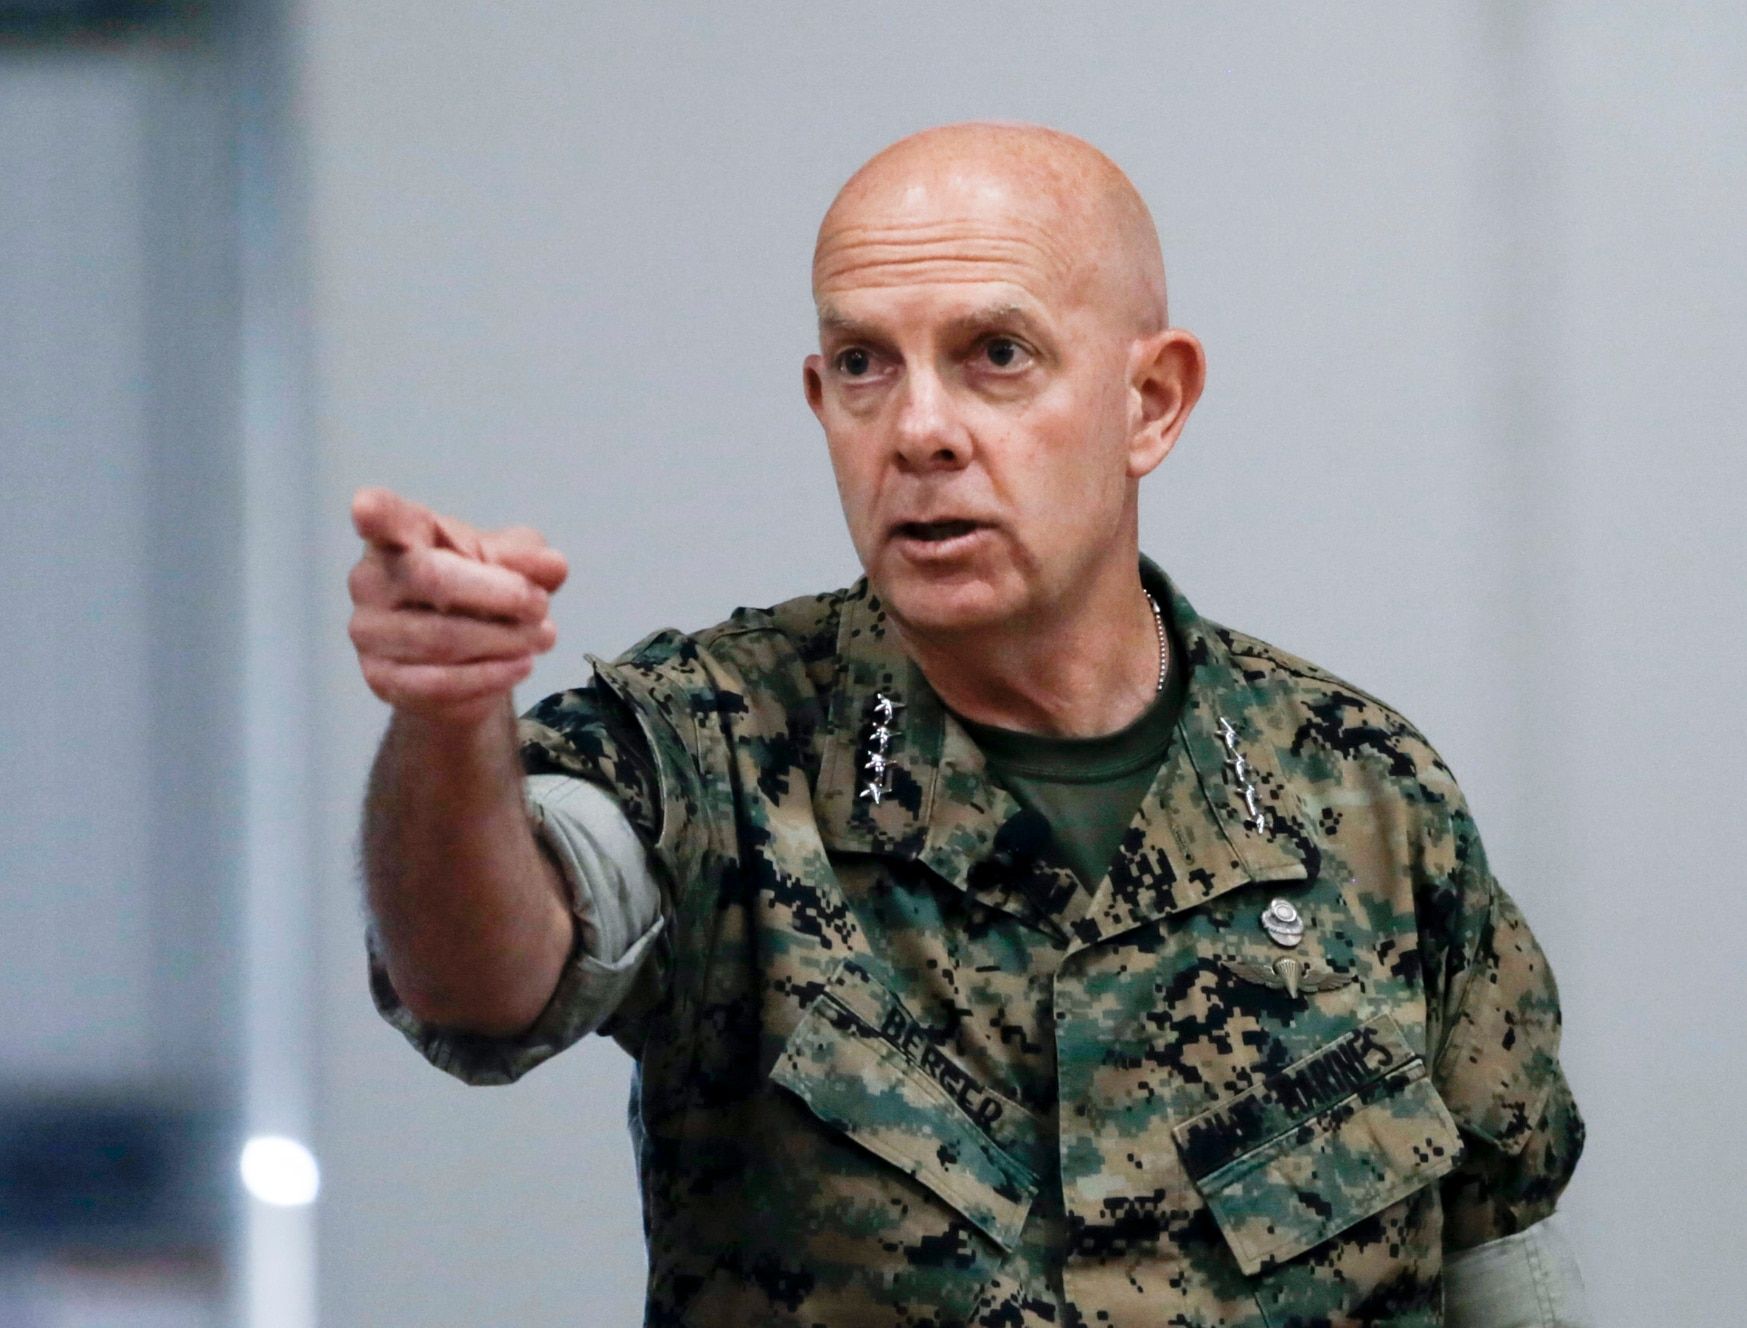 In his fight to change the Corps, America's top Marine takes friendly fire